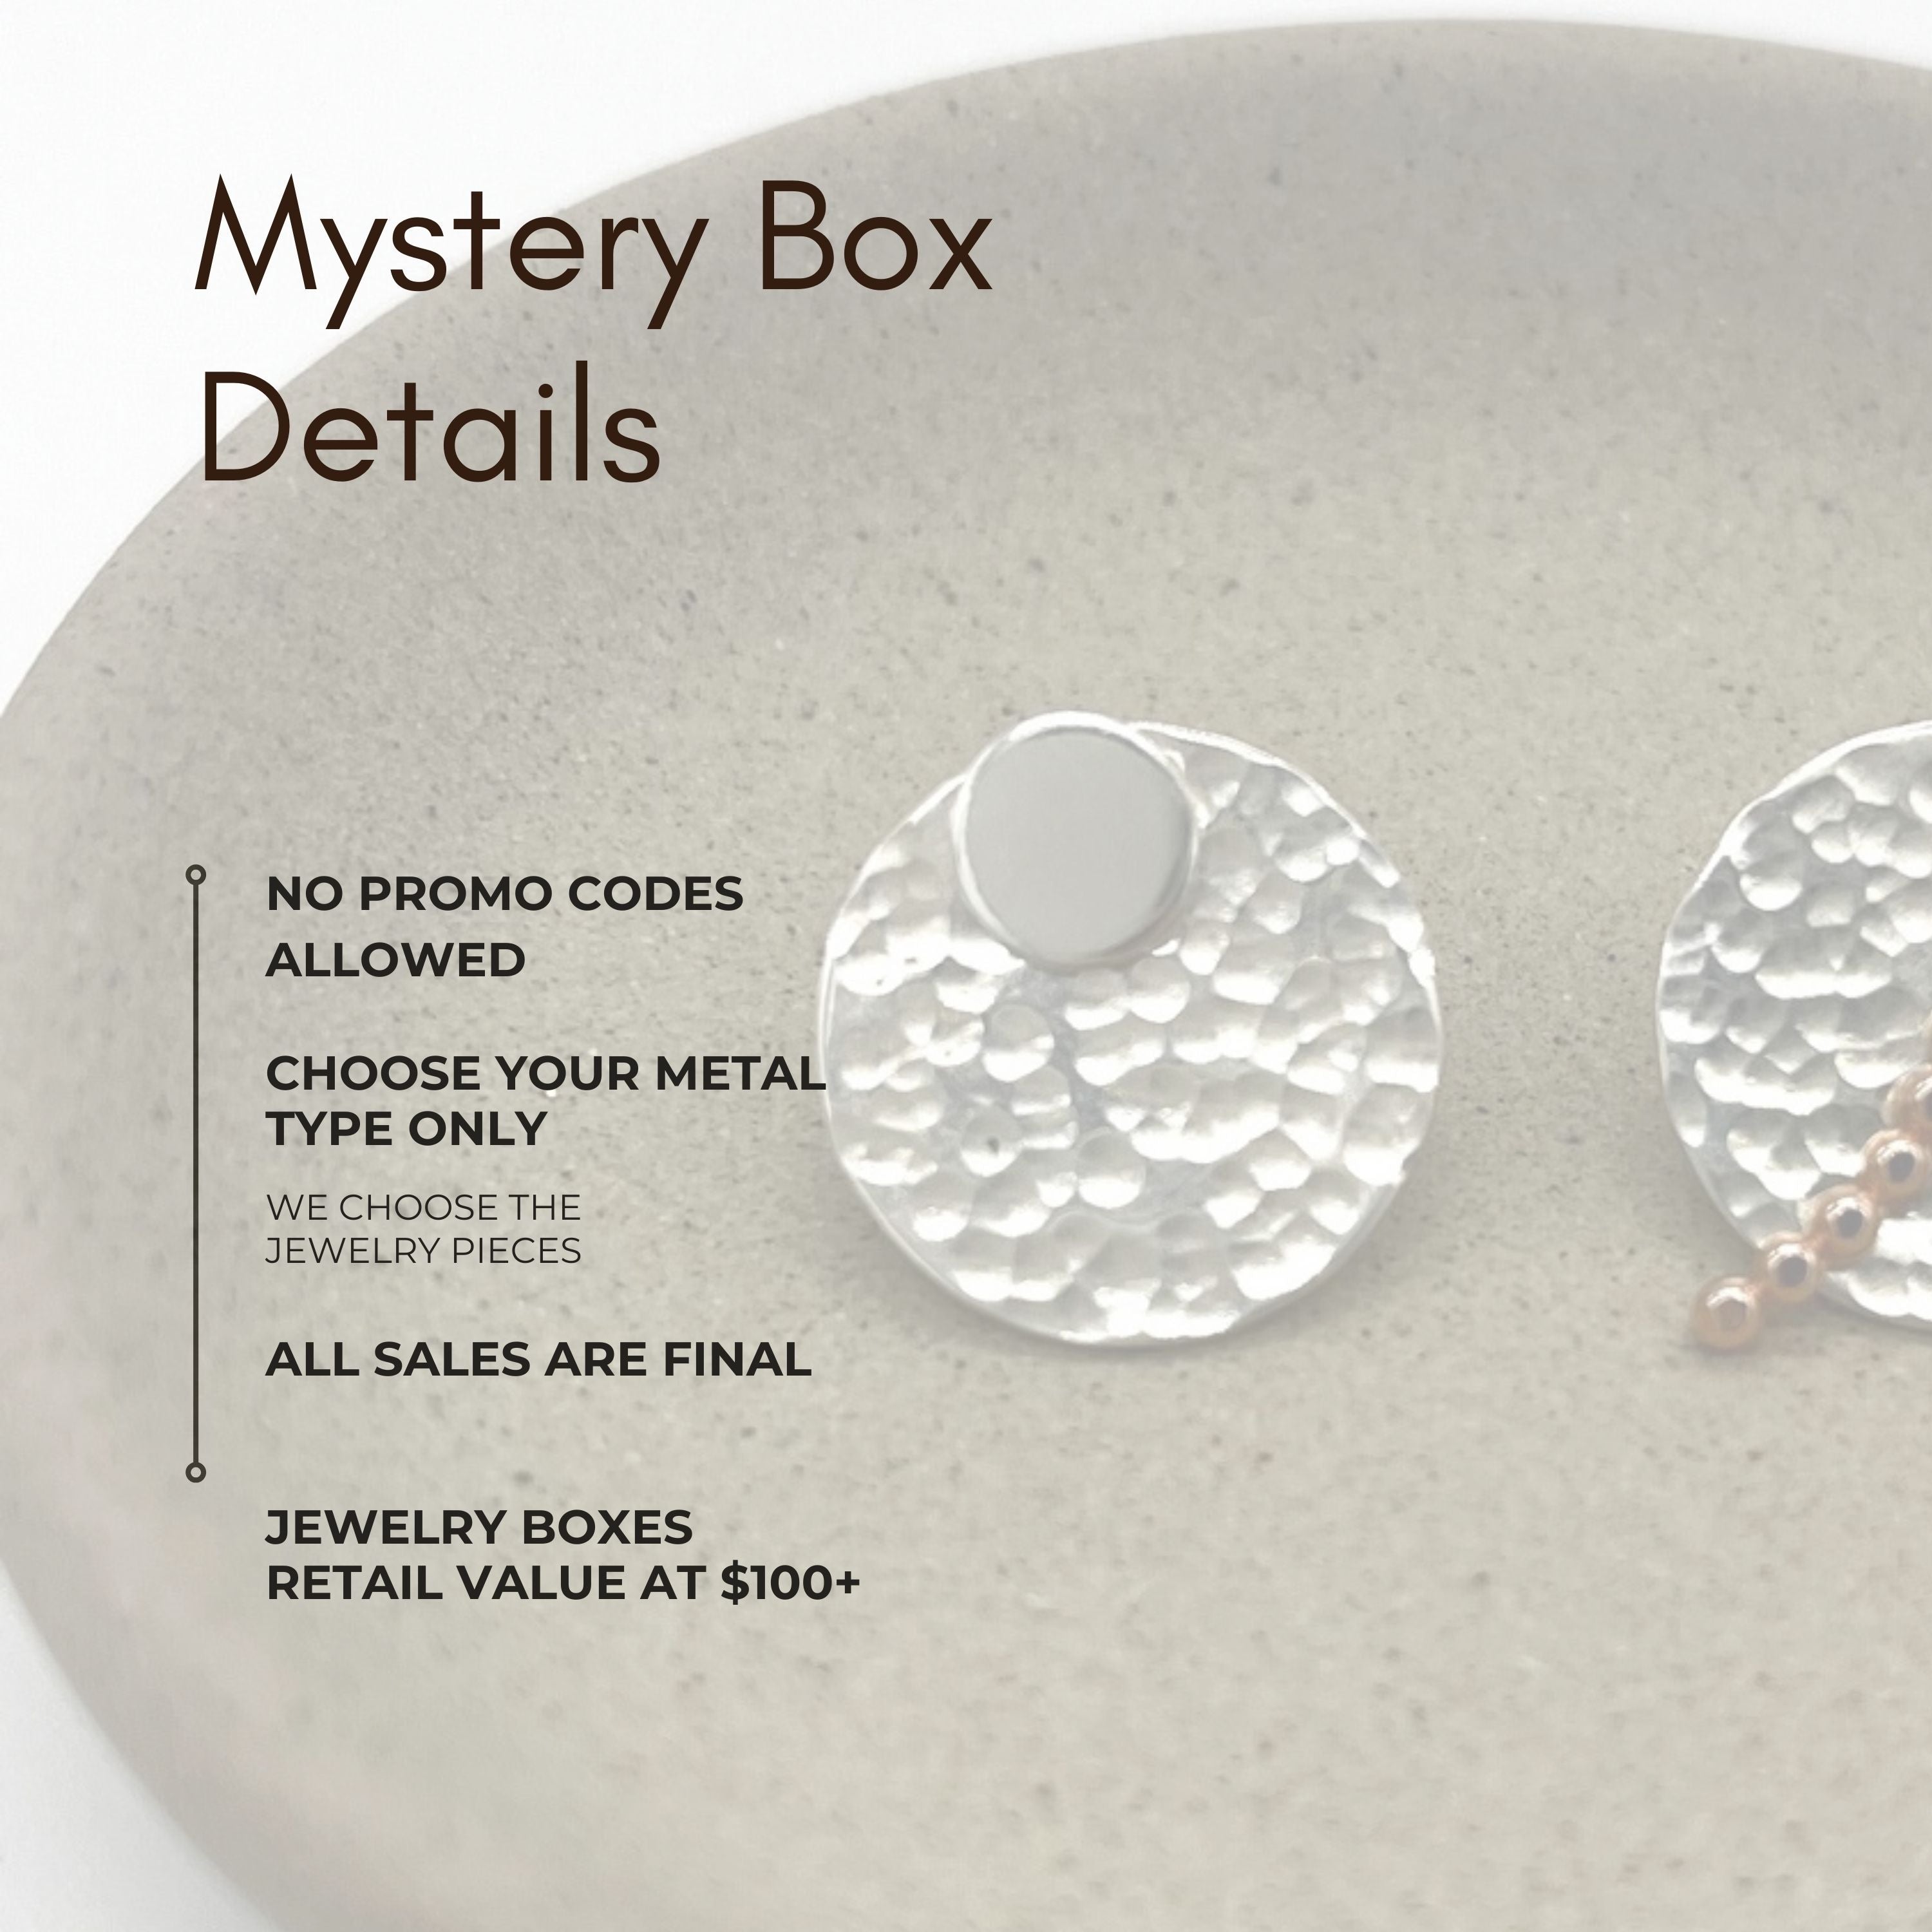 Mini Mystery Jewelry Box - For your Galentine or Valentine